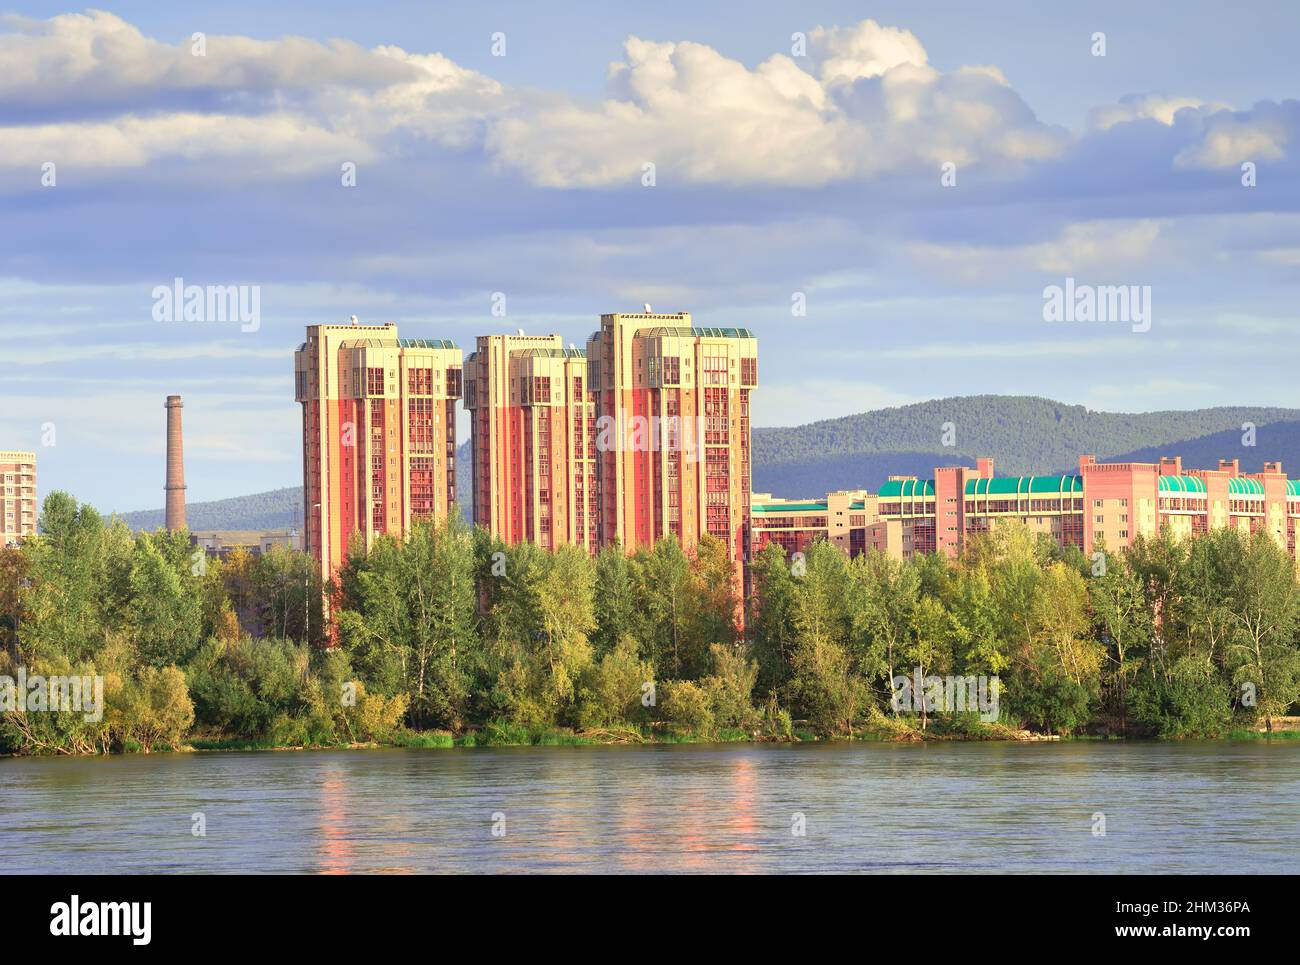 High-rise buildings of the Yuzhny microdistrict against the background of mountains under a blue cloudy sky. Krasnoyarsk, Siberia, Russia Stock Photo